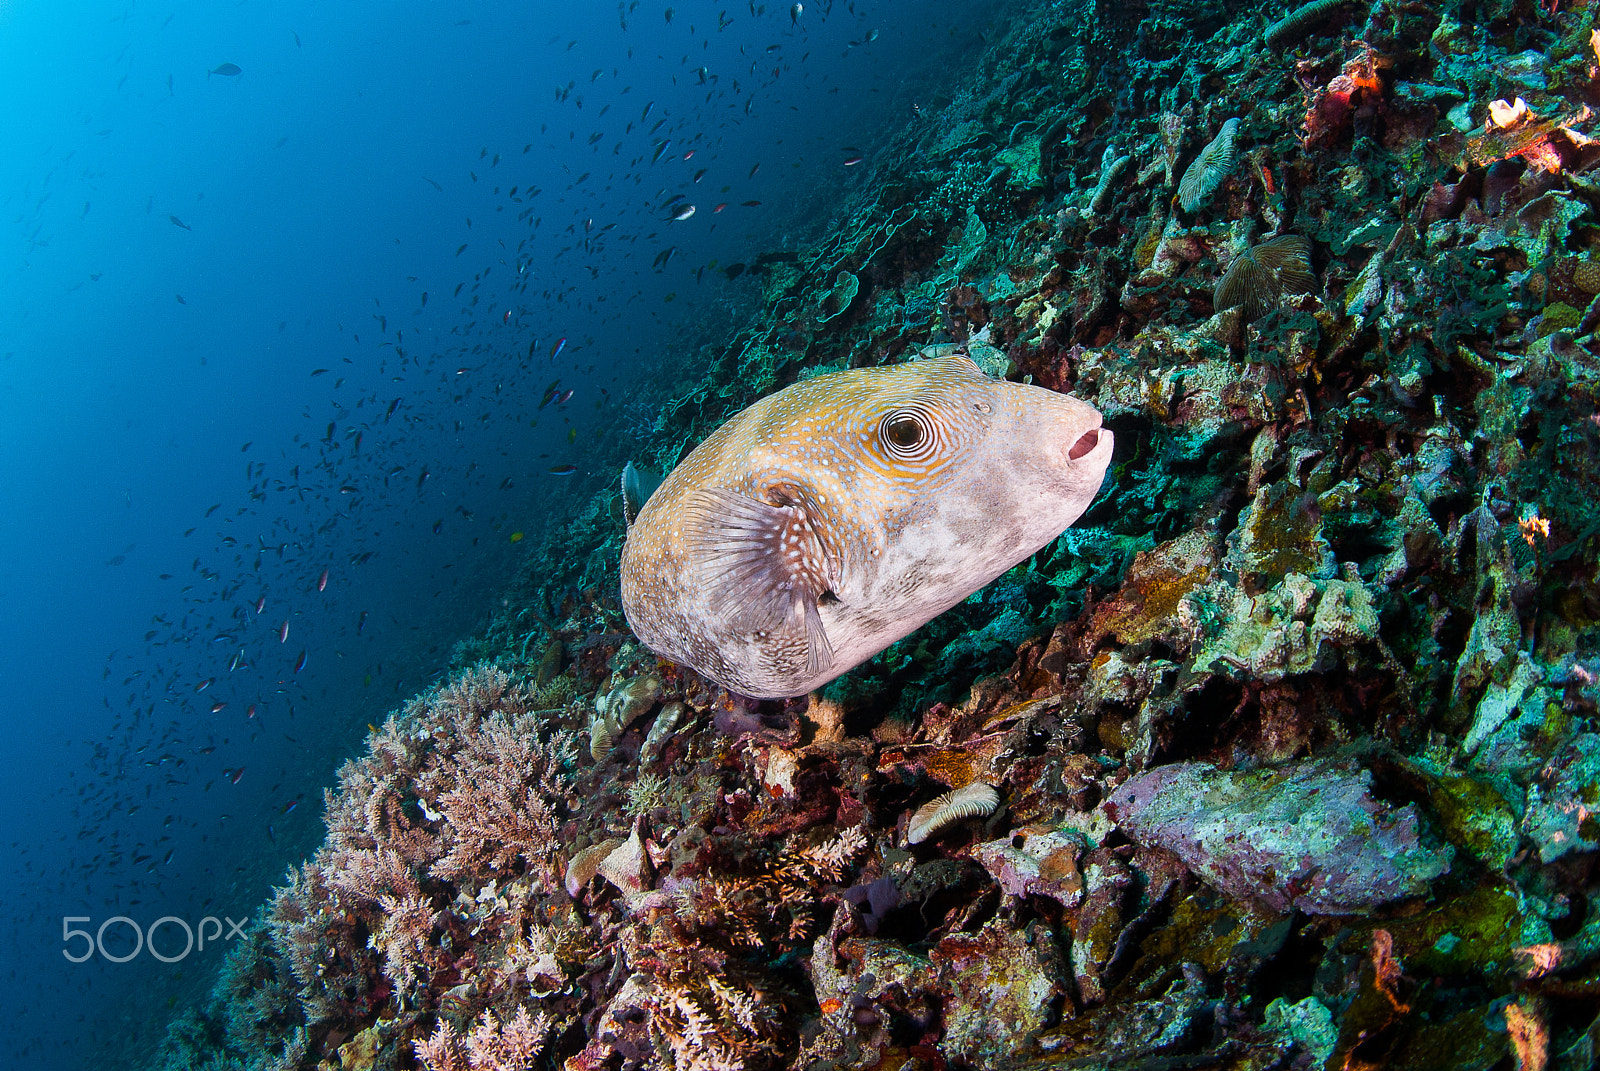 Nikon D200 sample photo. Giant pufferfish swimming above the reef photography